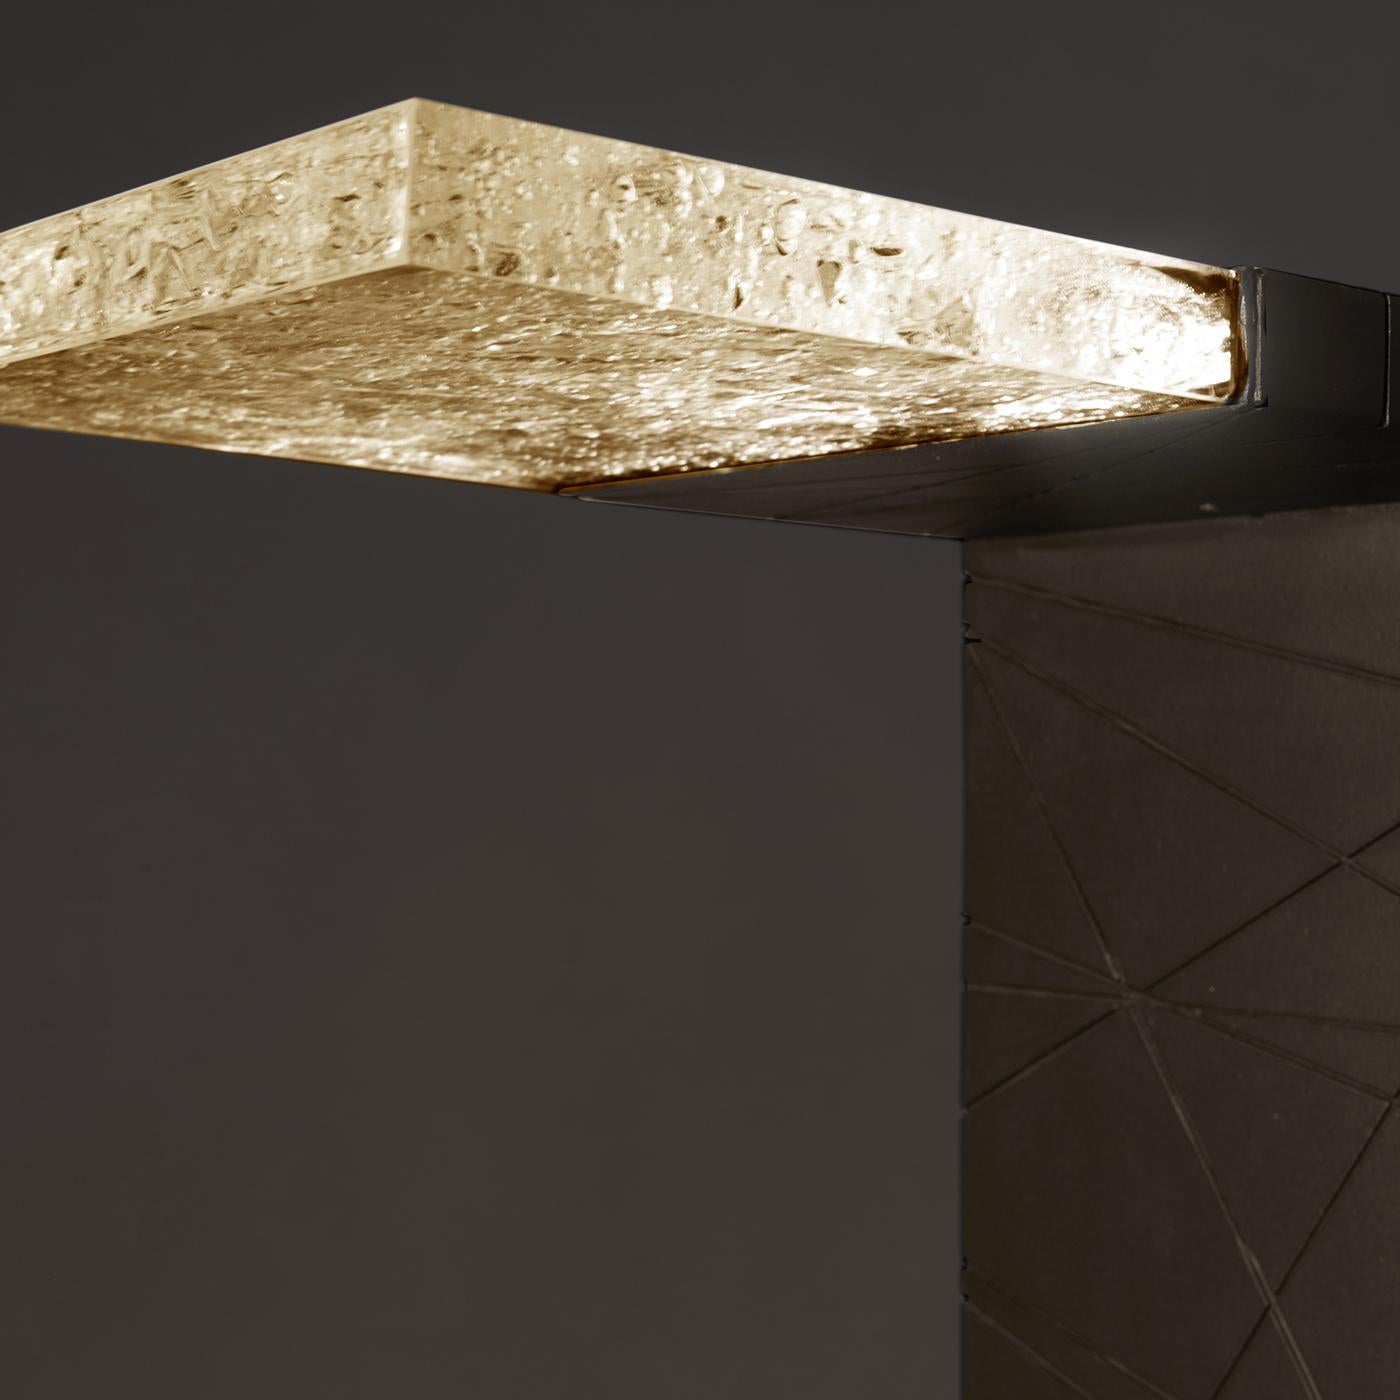 Defined by a sleek, essential silhouette of majestic proportions, this floor lamp blends form and function. Handcrafted of ground volcanic rock with a rust finish, the L-shaped body features at the end of the top arm a clear element containing